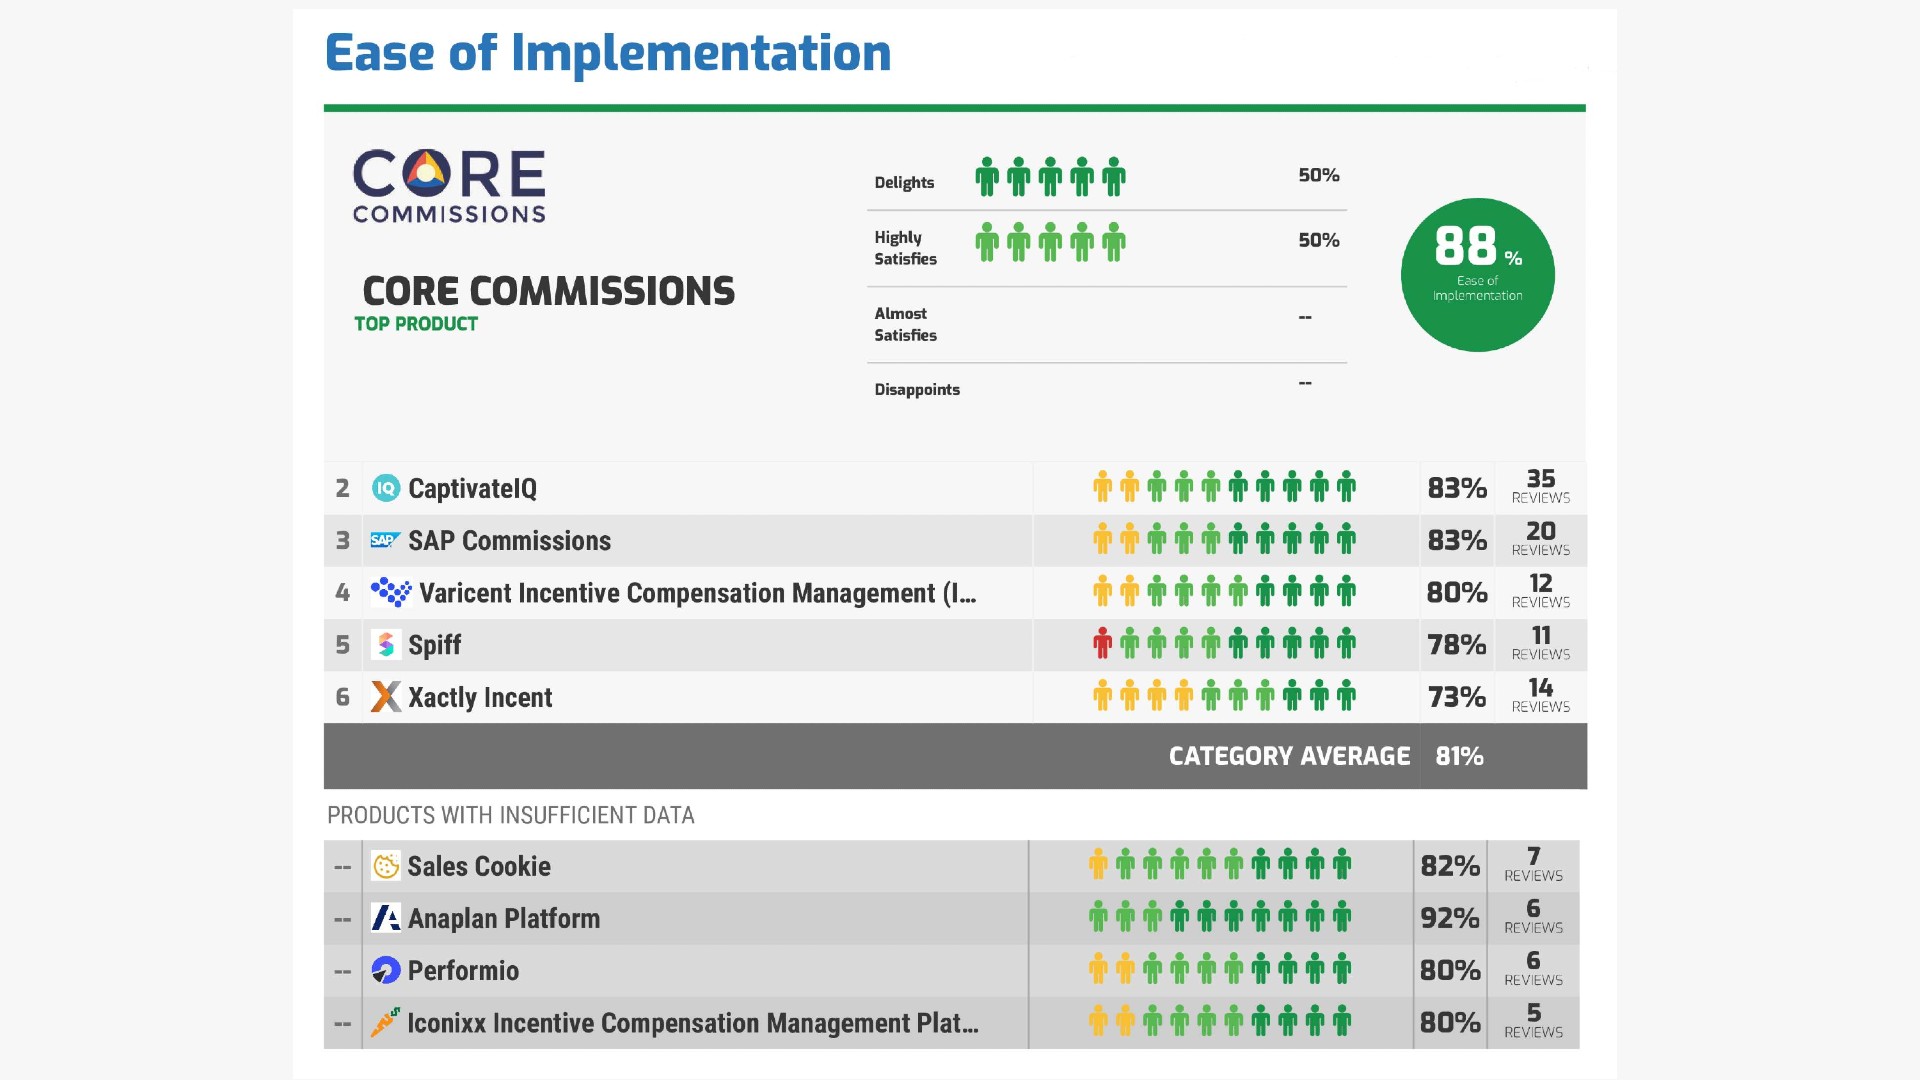 Ease of Implementation score for commission software vendors where Core Commissions ranks on top.